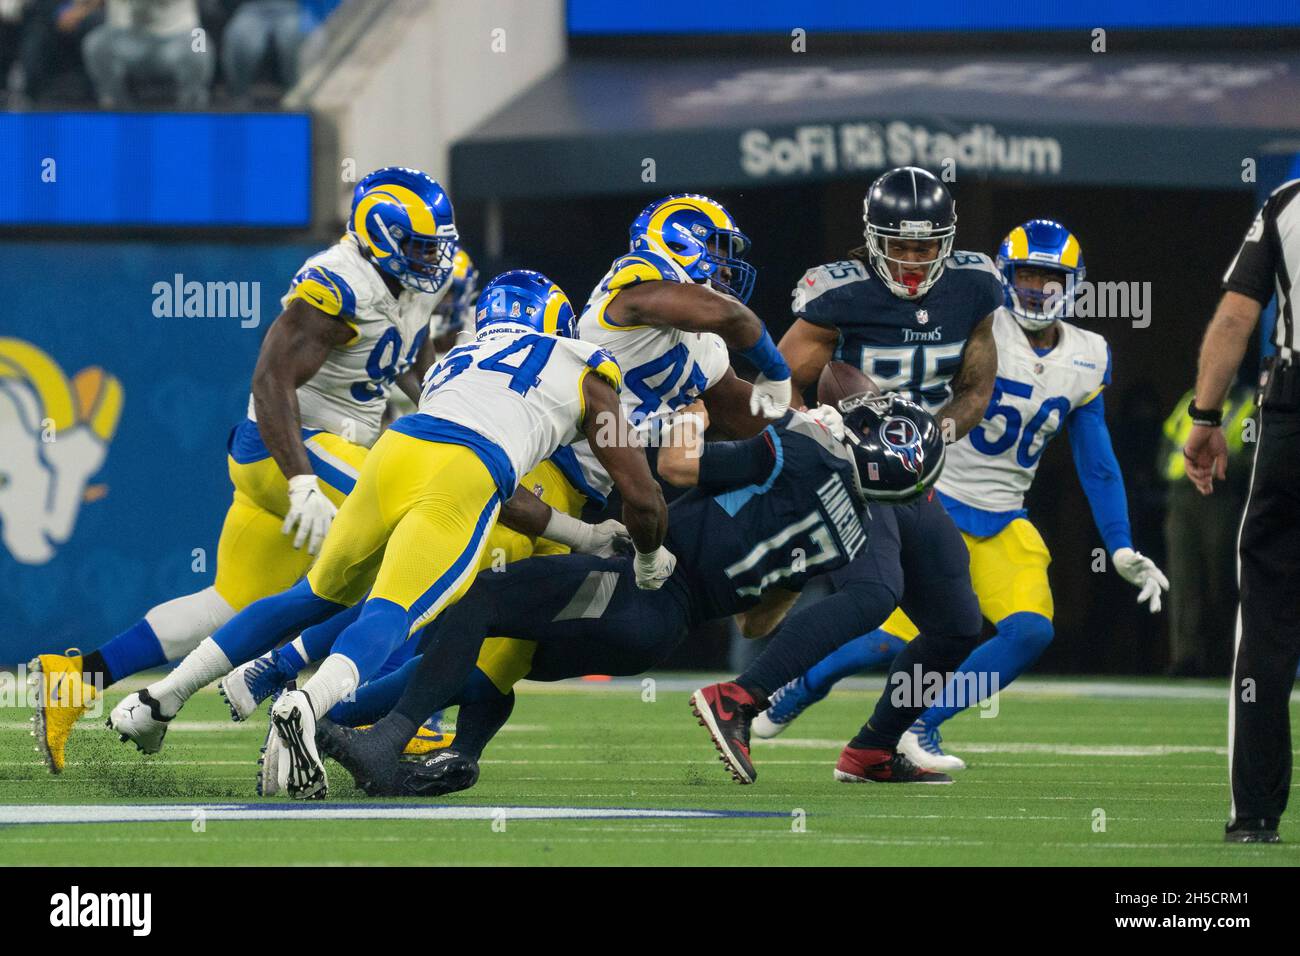 Los Angeles Rams linebacker Obo Okoronkwo (45) is called for roughing the passer against Tennessee Titans quarterback Ryan Tannehill (17) during a NFL Stock Photo